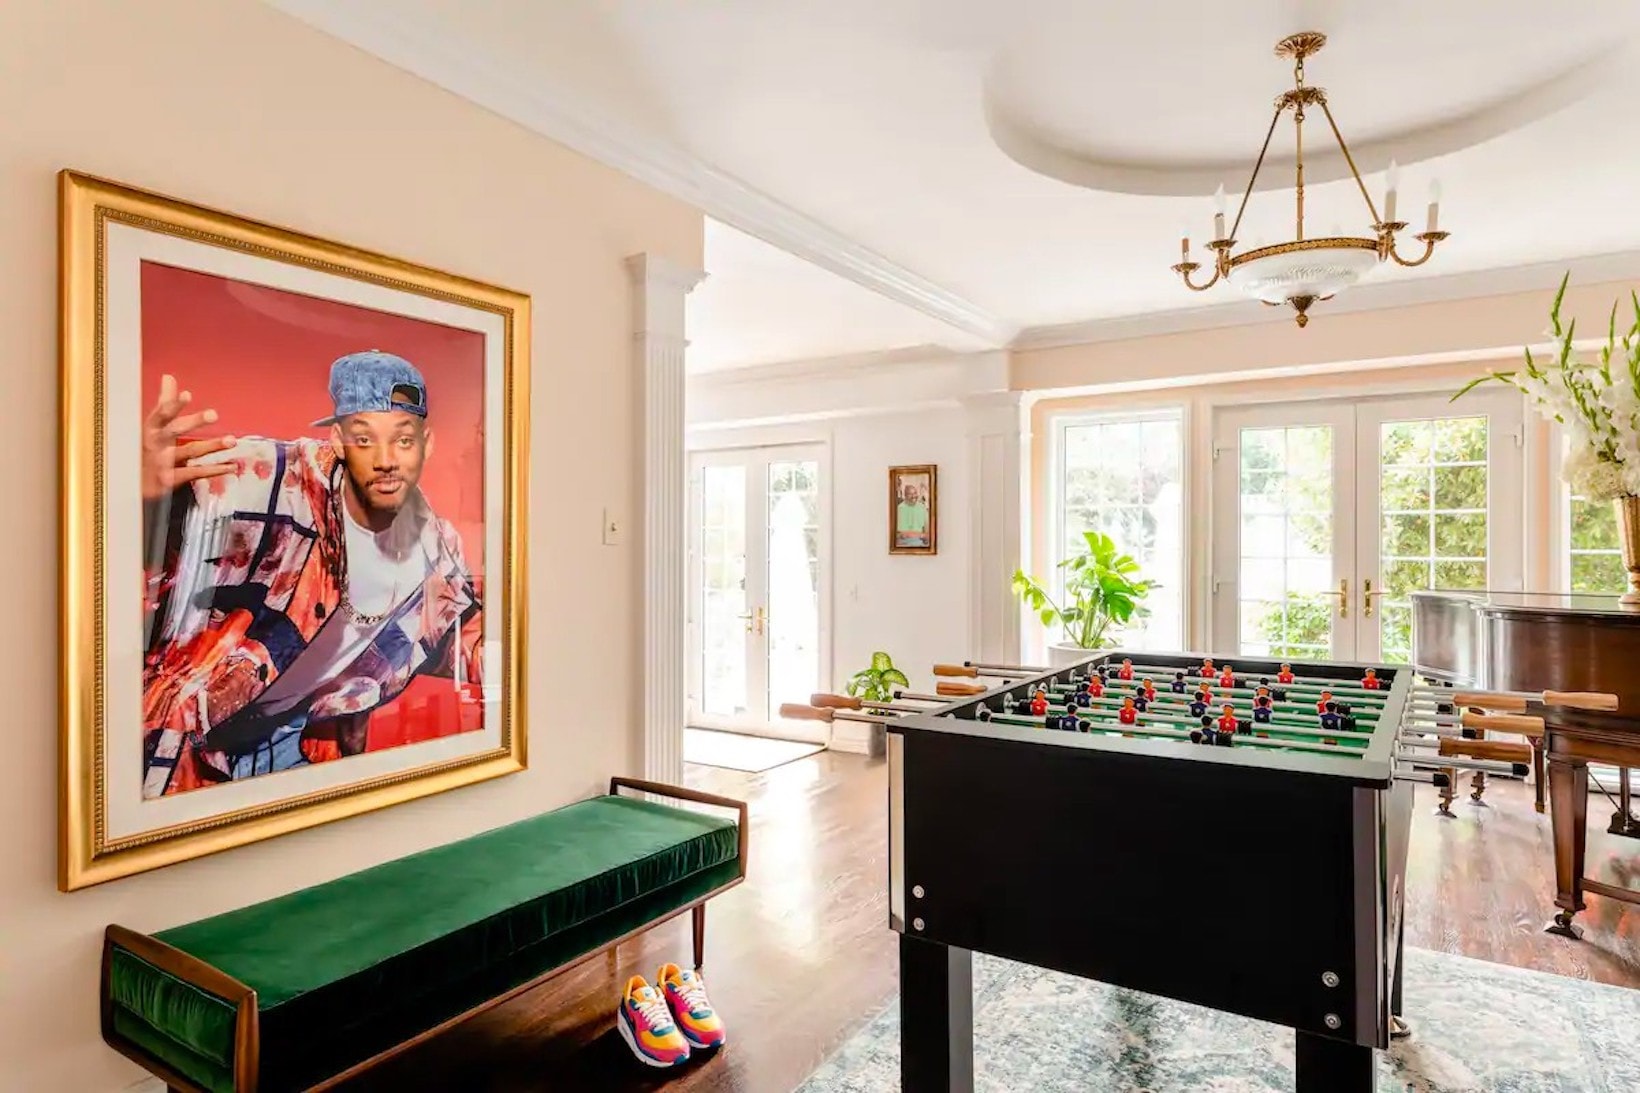 will smith the fresh prince of bel air mansion airbnb brentwood california united states